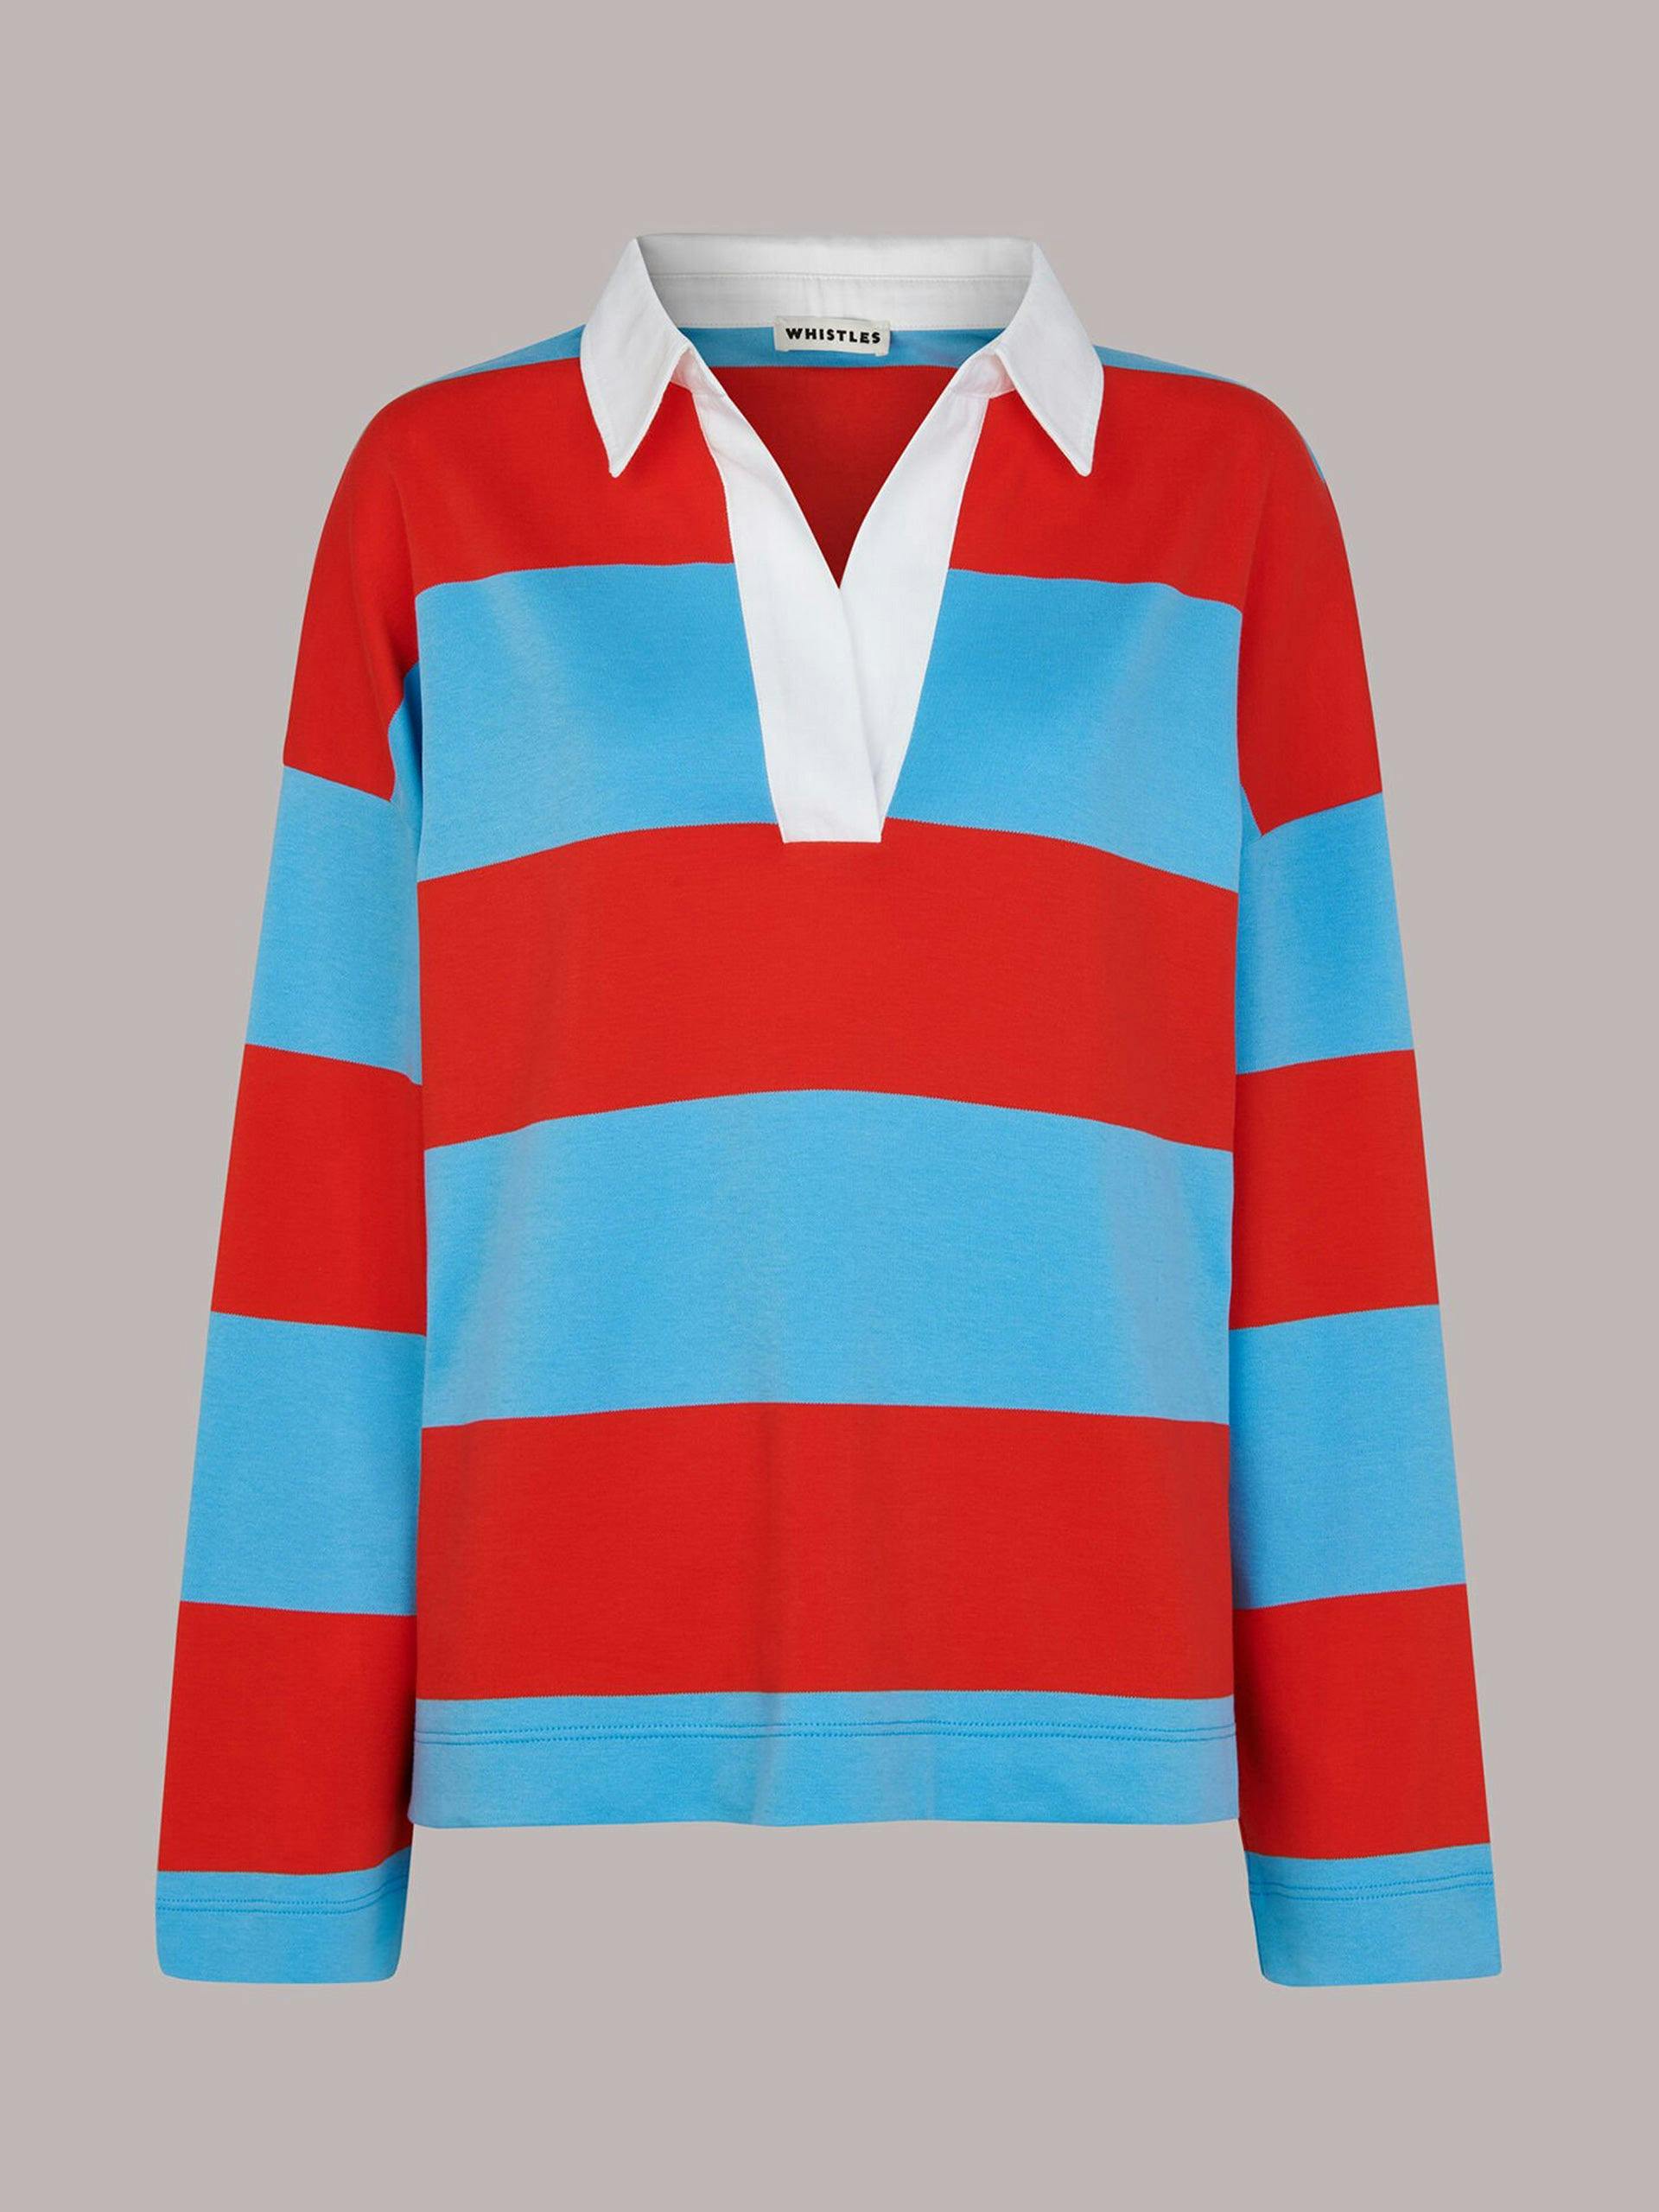 Red and blue striped rugby shirt